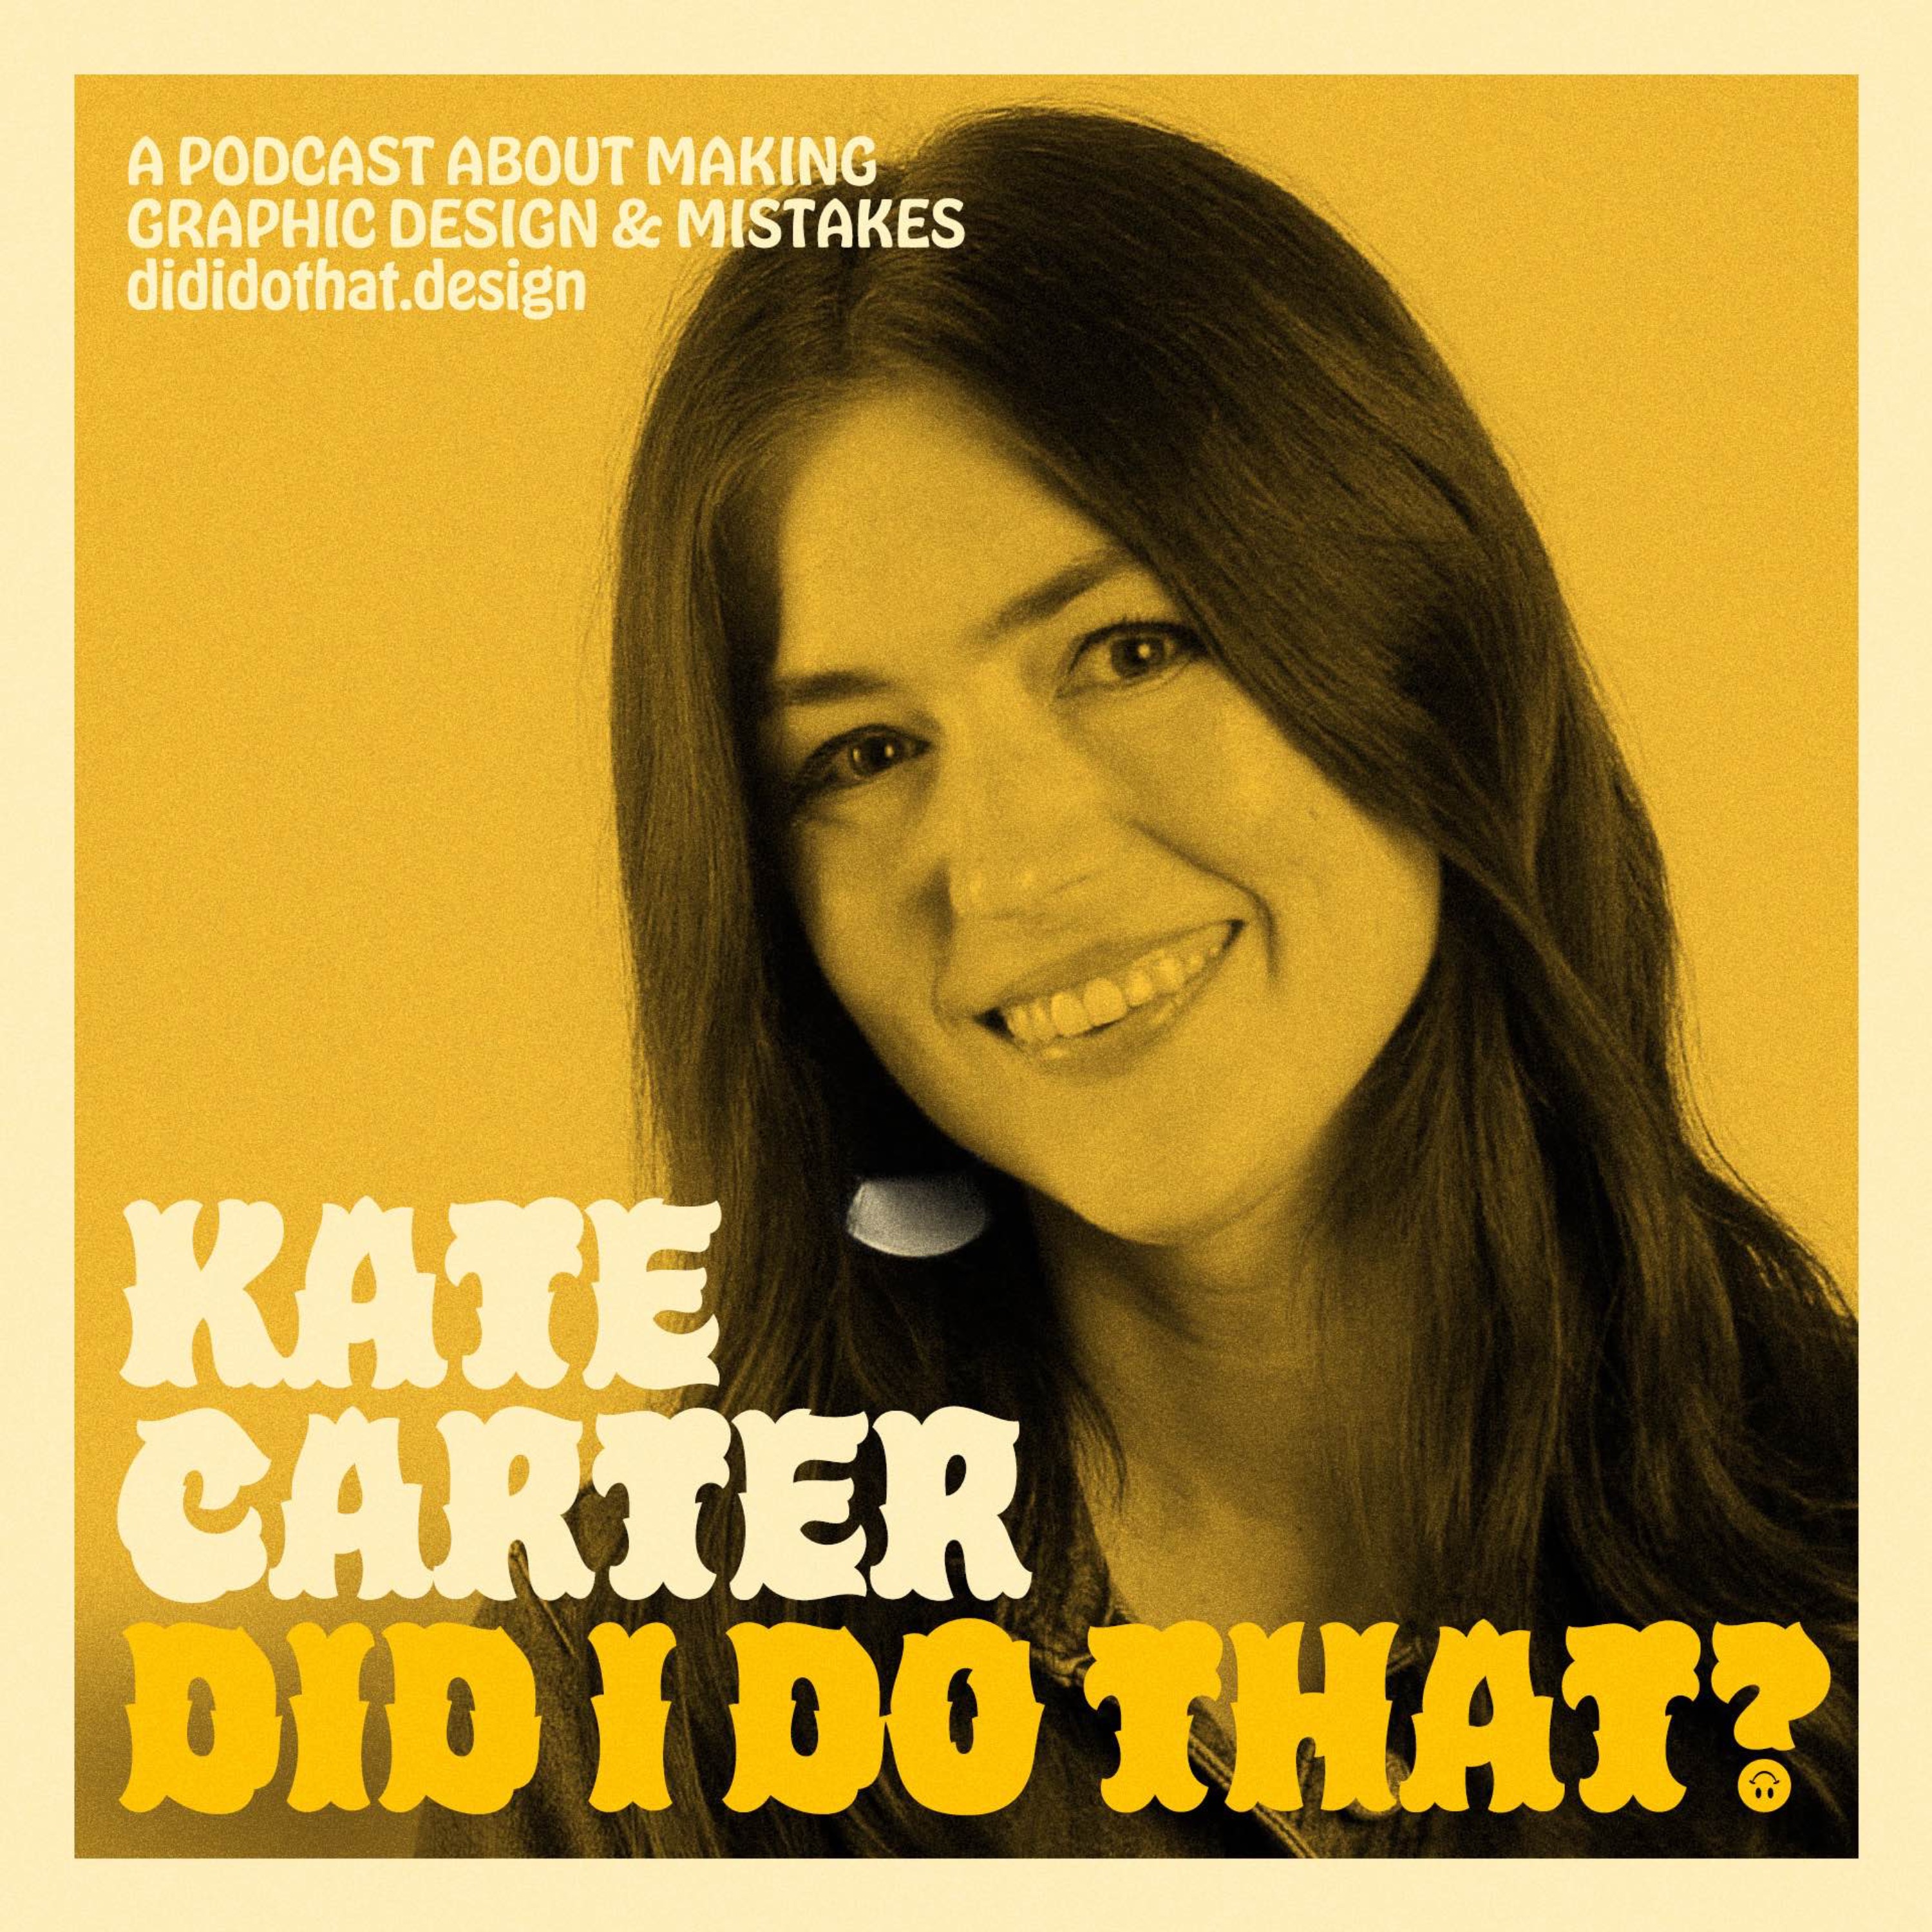 Agents of Chaos (with Kate Carter)